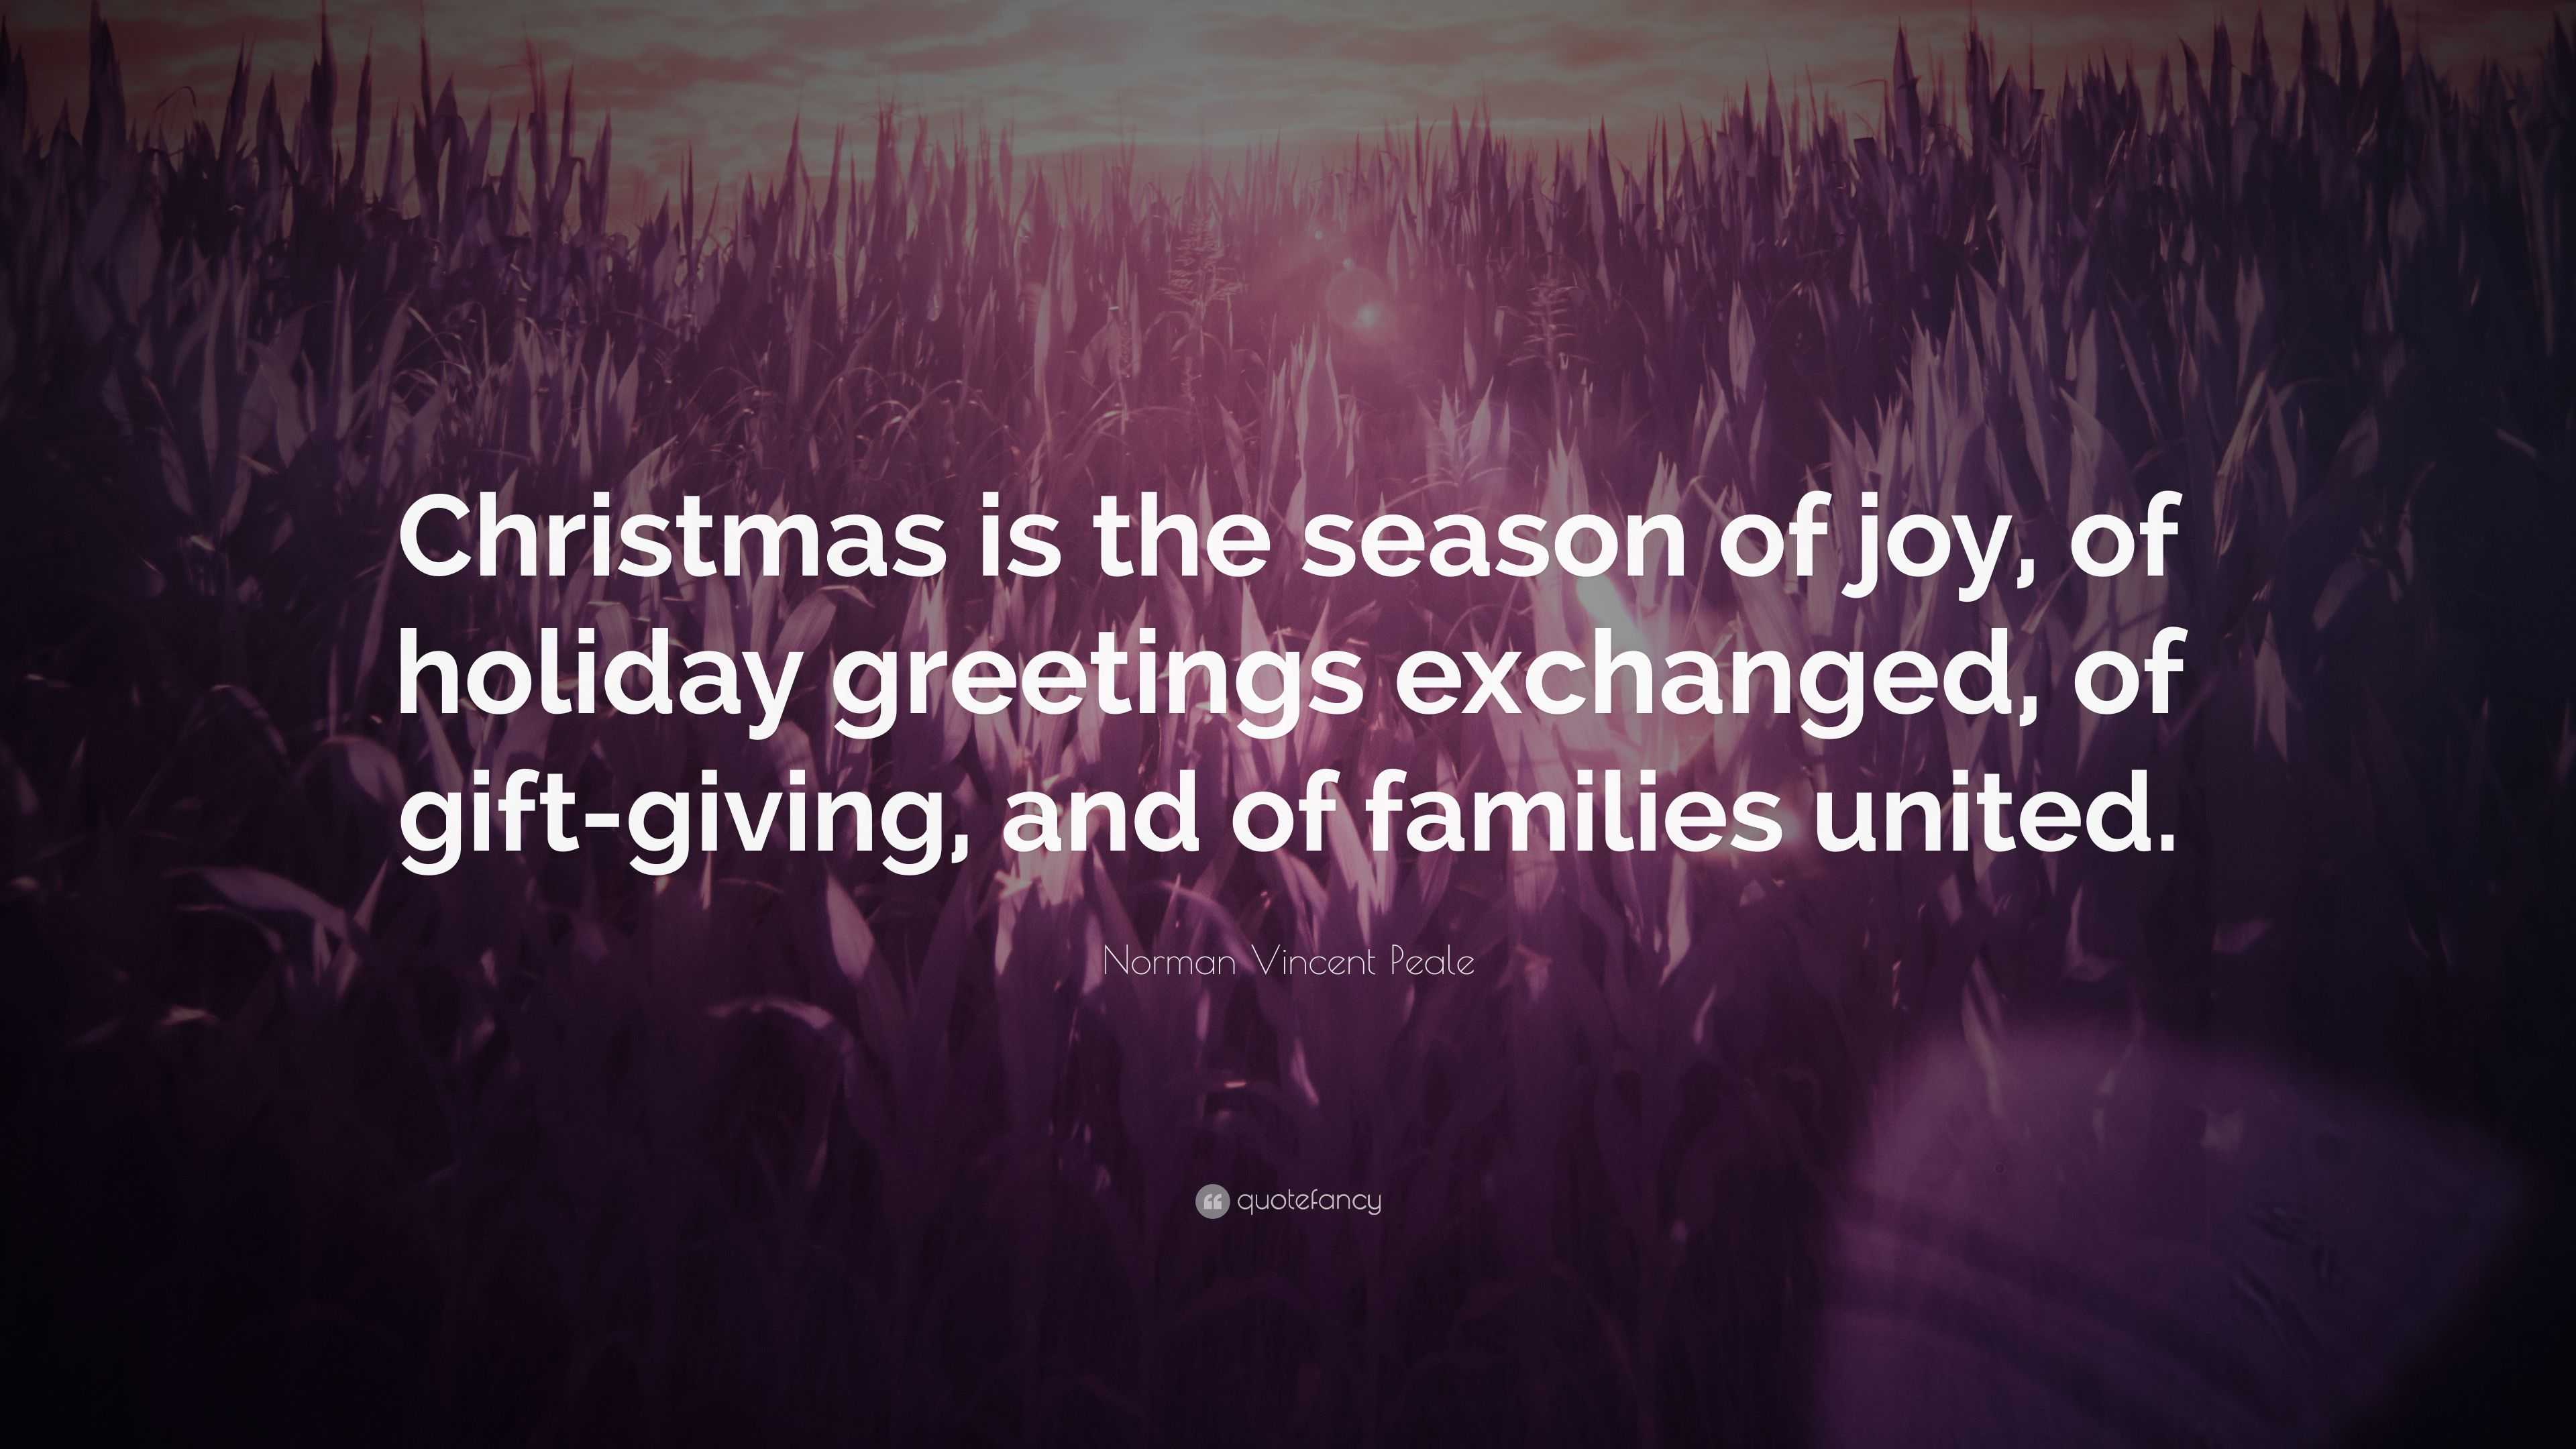 Norman Vincent Peale Quote: "Christmas is the season of joy, of holiday ...